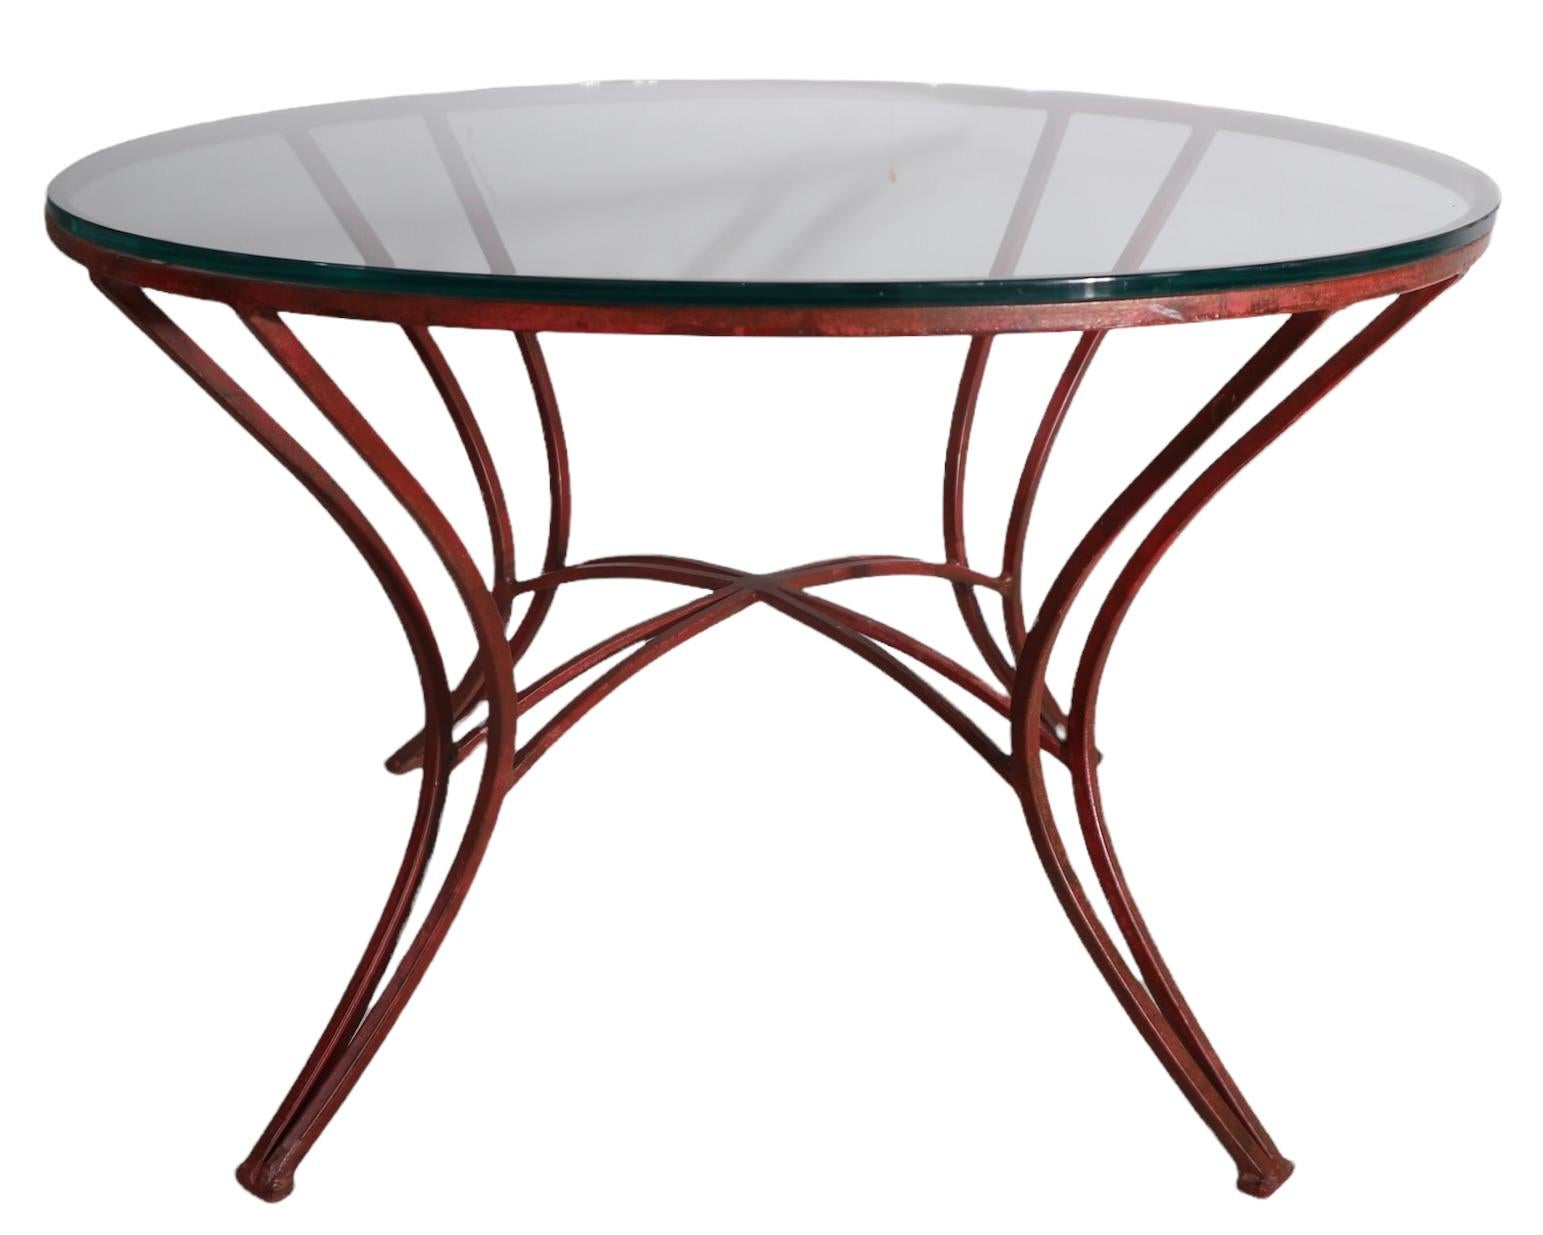 Mid-Century Modern Wrought Iron and Glass Side Table Suitable for Patio, Garden or Poolside Use For Sale